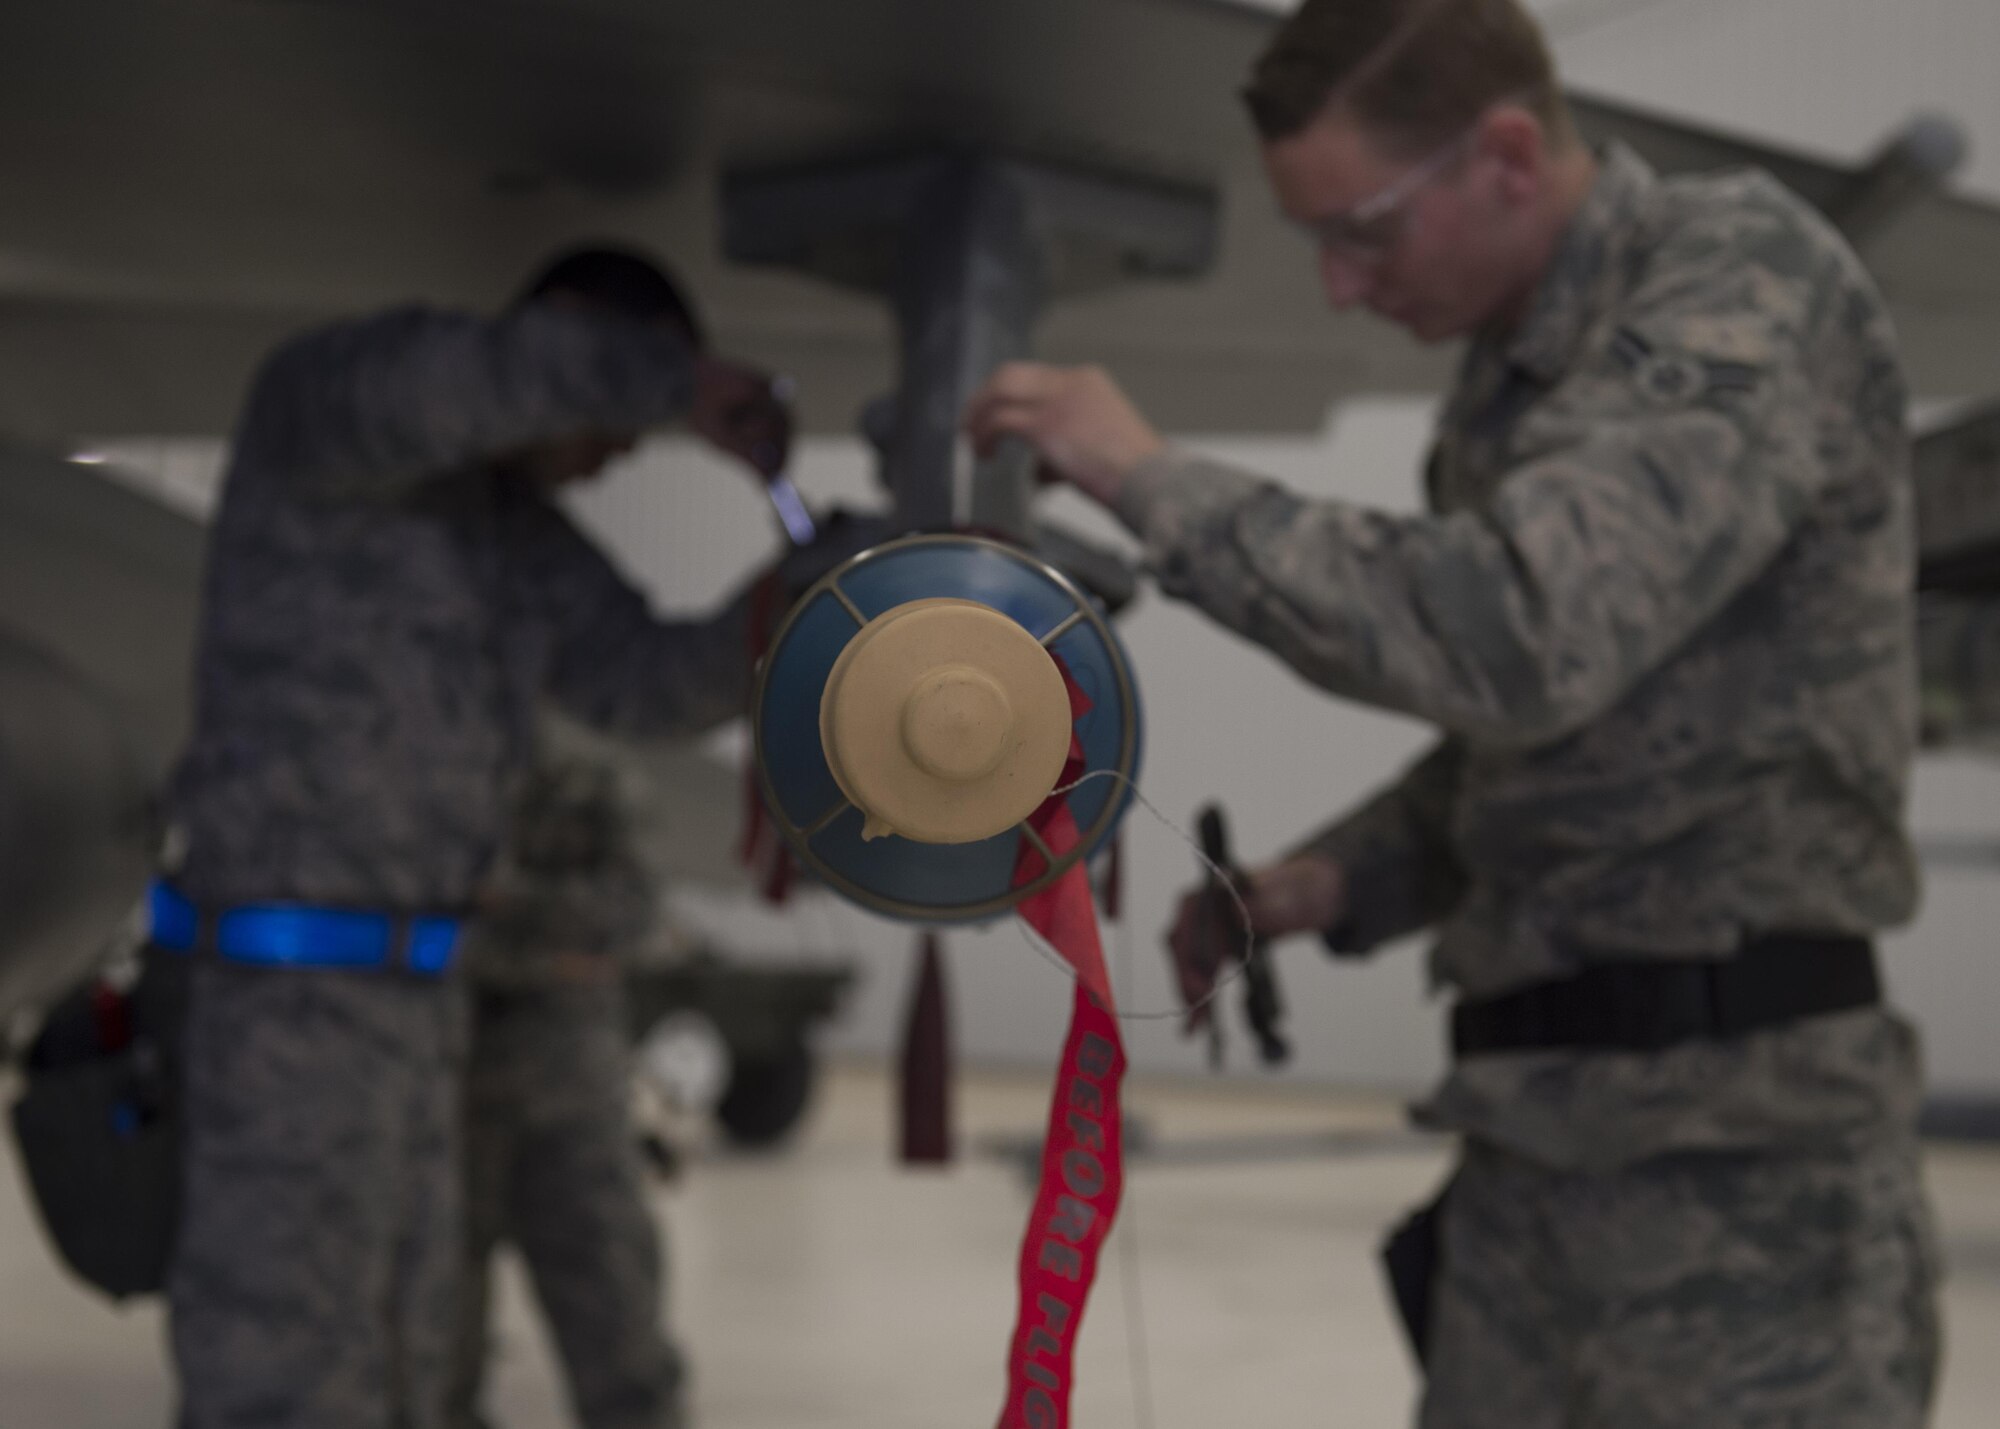 Members of the 54th Fighter Group load crew secure an inert munition onto an F-16 Fighting Falcon during a quarterly load crew competition at Holloman Air Force Base, N.M., Jan. 20, 2016. The weapons load crews for German Air Force Tornado, F-16 Fighting Falcon and MQ-9 Reaper competed against each other to load weapons the most efficiently and with the least amount of procedural errors. Points for the competition are awarded based on weapons loading, tool kit inspection and uniform inspection categories. (U.S. Air Force photo by Senior Airman Chase Cannon/ Released)